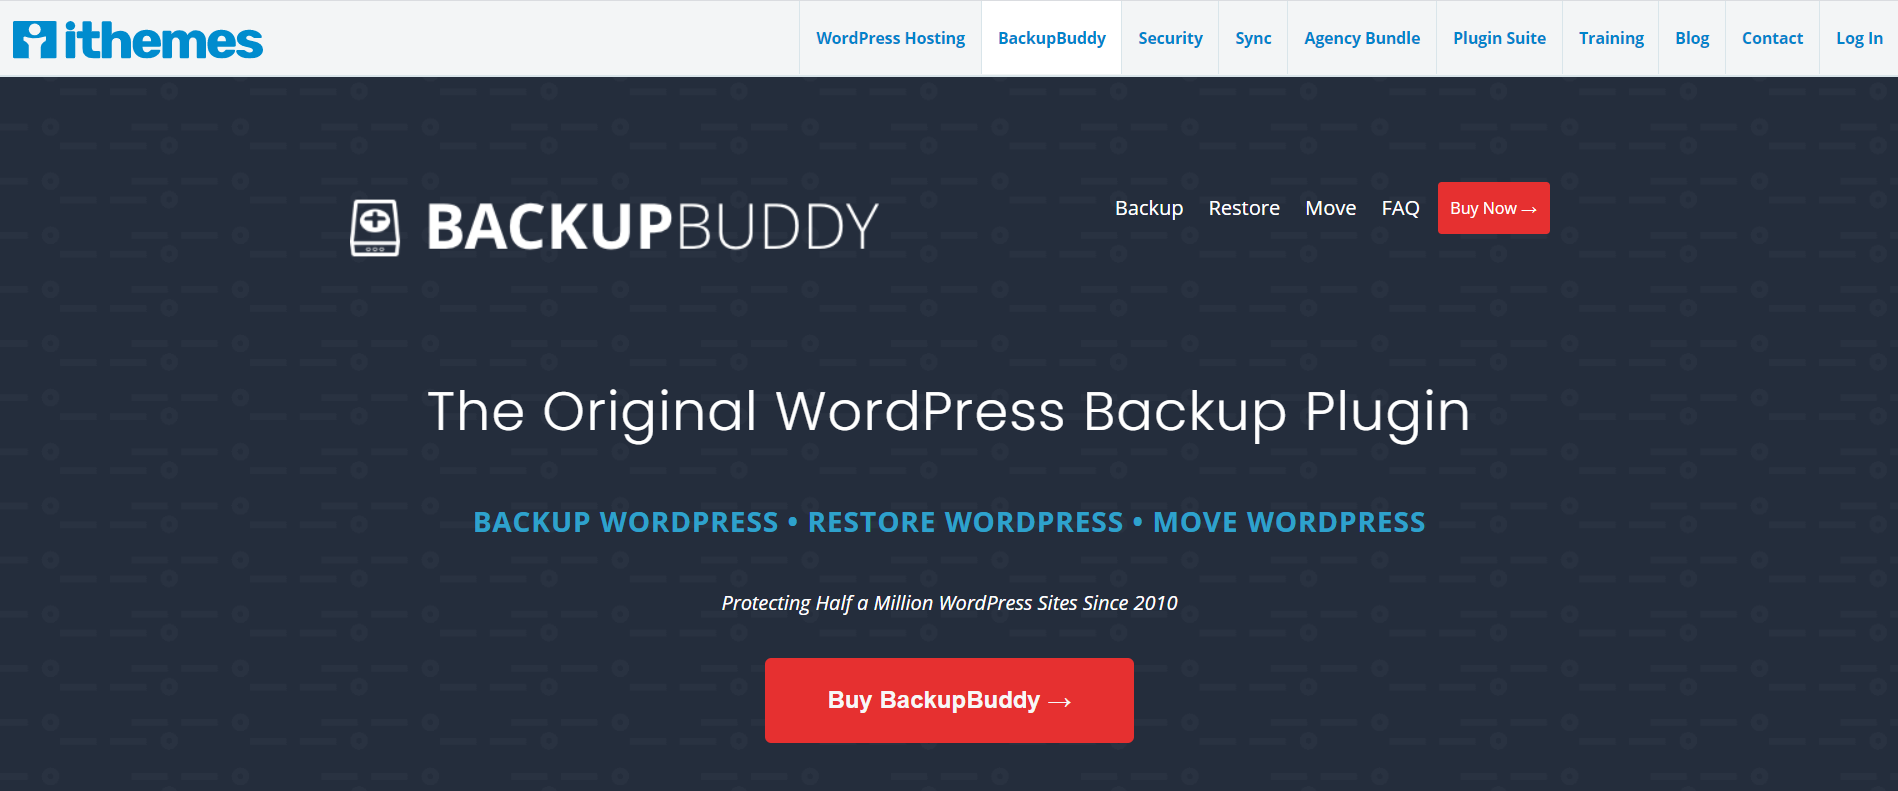 What's New With BackupBuddy For WordPress Home Page